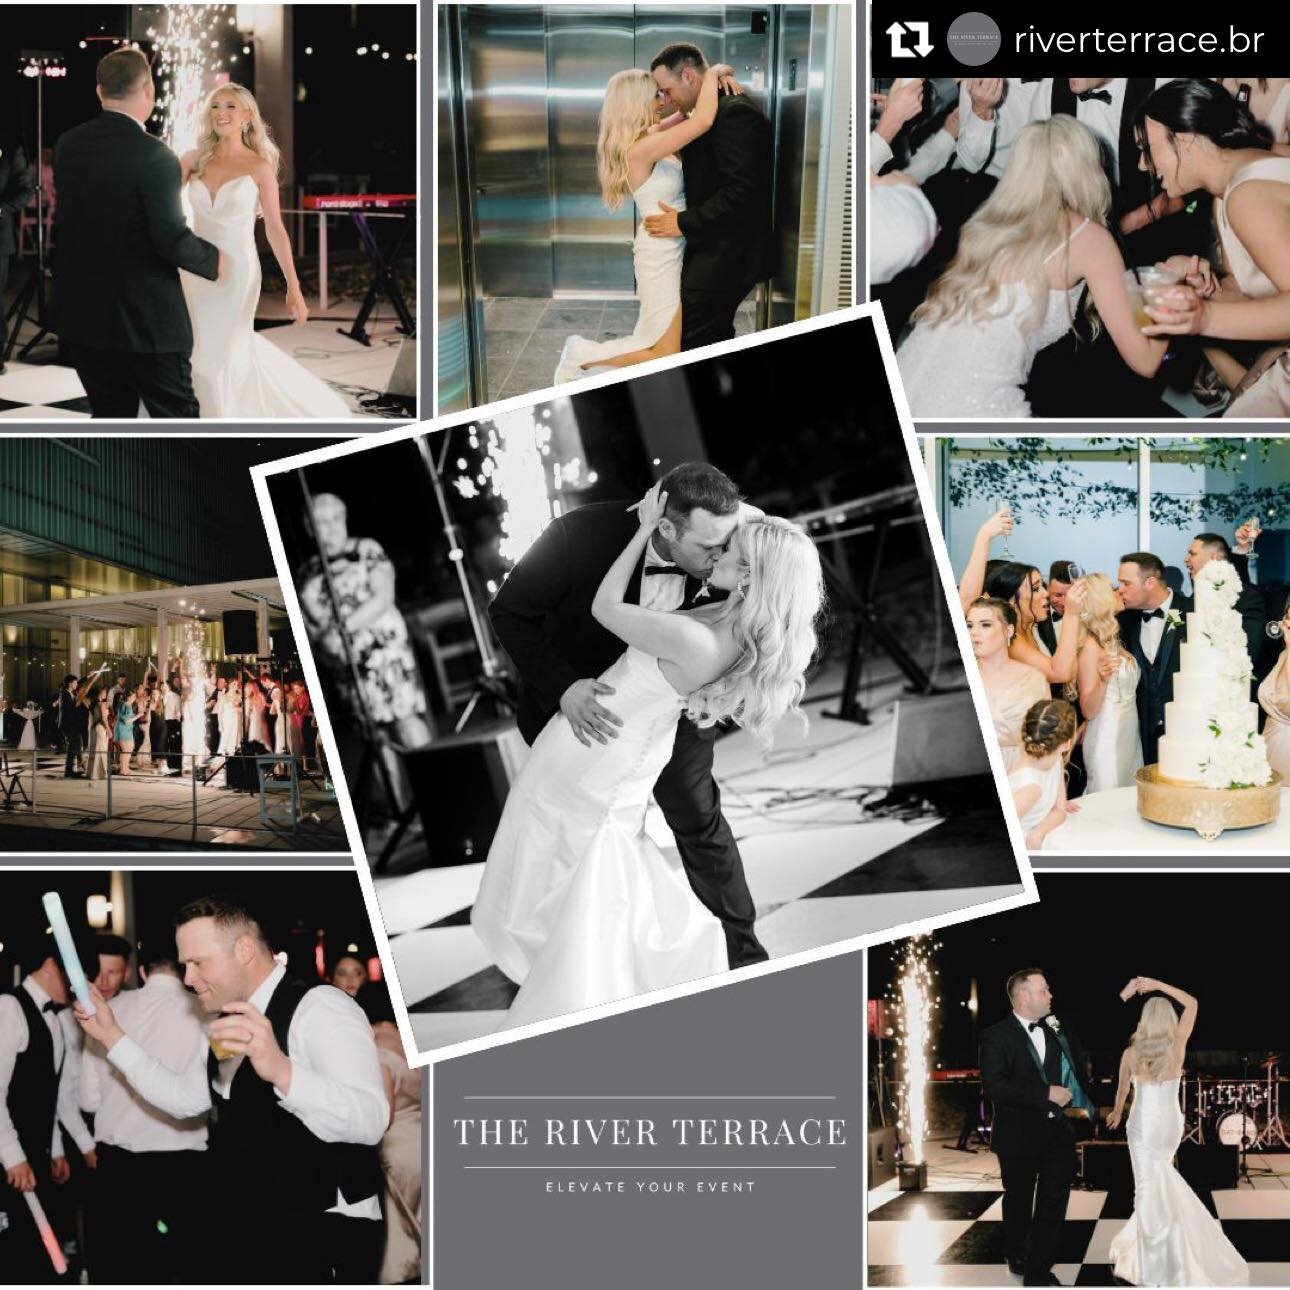 Follow along and explore all the magic that happens on our rooftop venue at @riverterrace.br! 🥂💍 From unforgettable celebrations like the Richards' to enchanting views, #ShawCenterForTheArts has it all! Elevate your next event and reach out today f